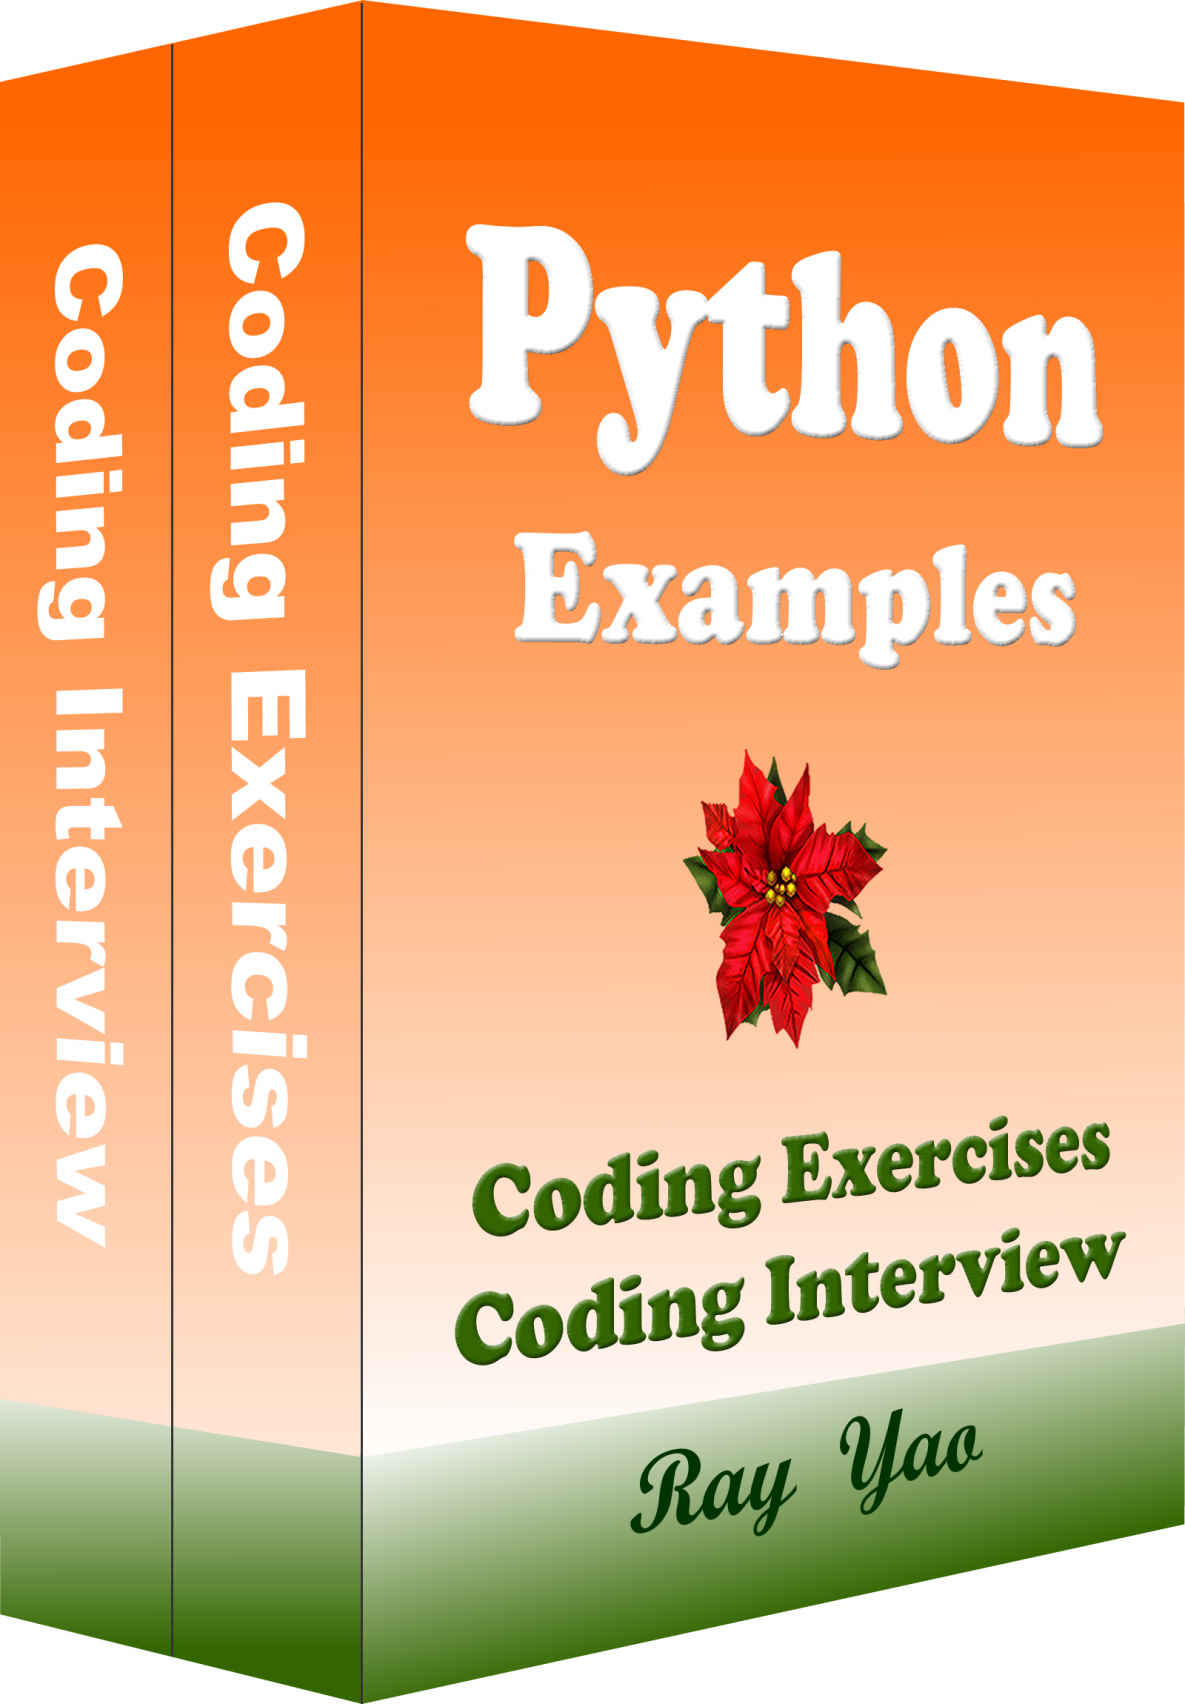 Python Examples: Coding Exercises, Coding Interview